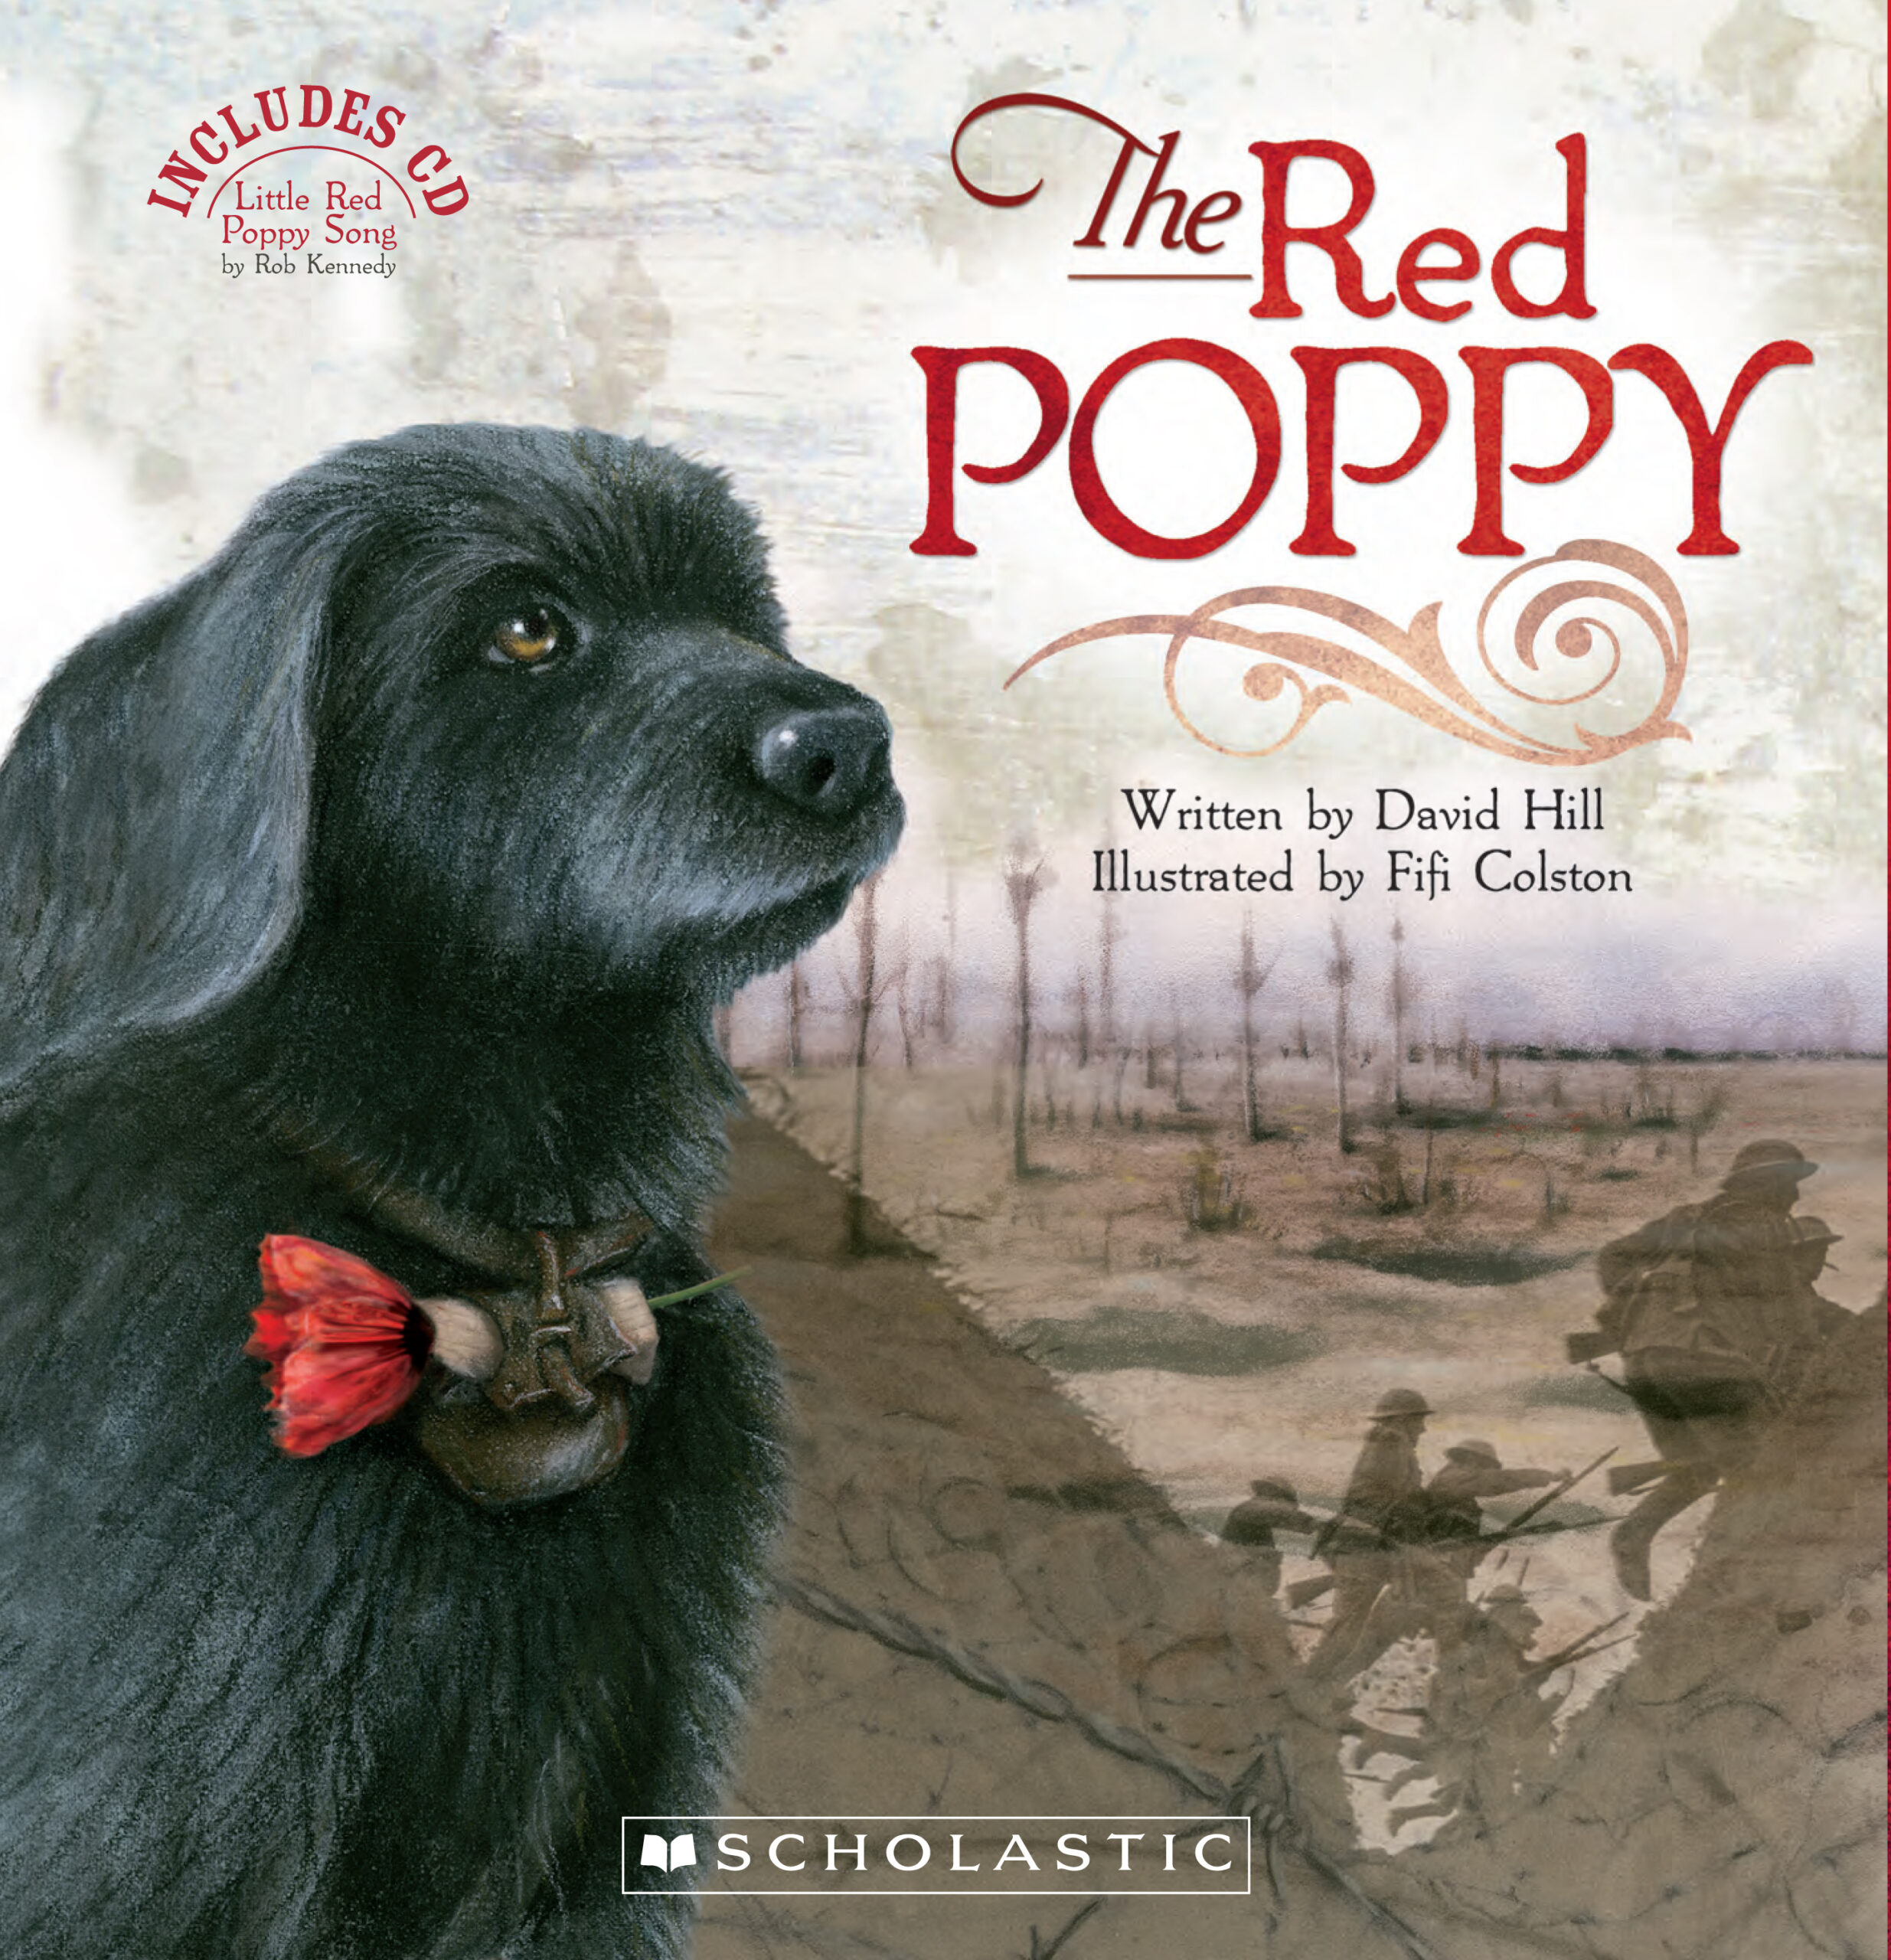 The Red Poppy: Image of the cover of the book “The Red Poppy”.